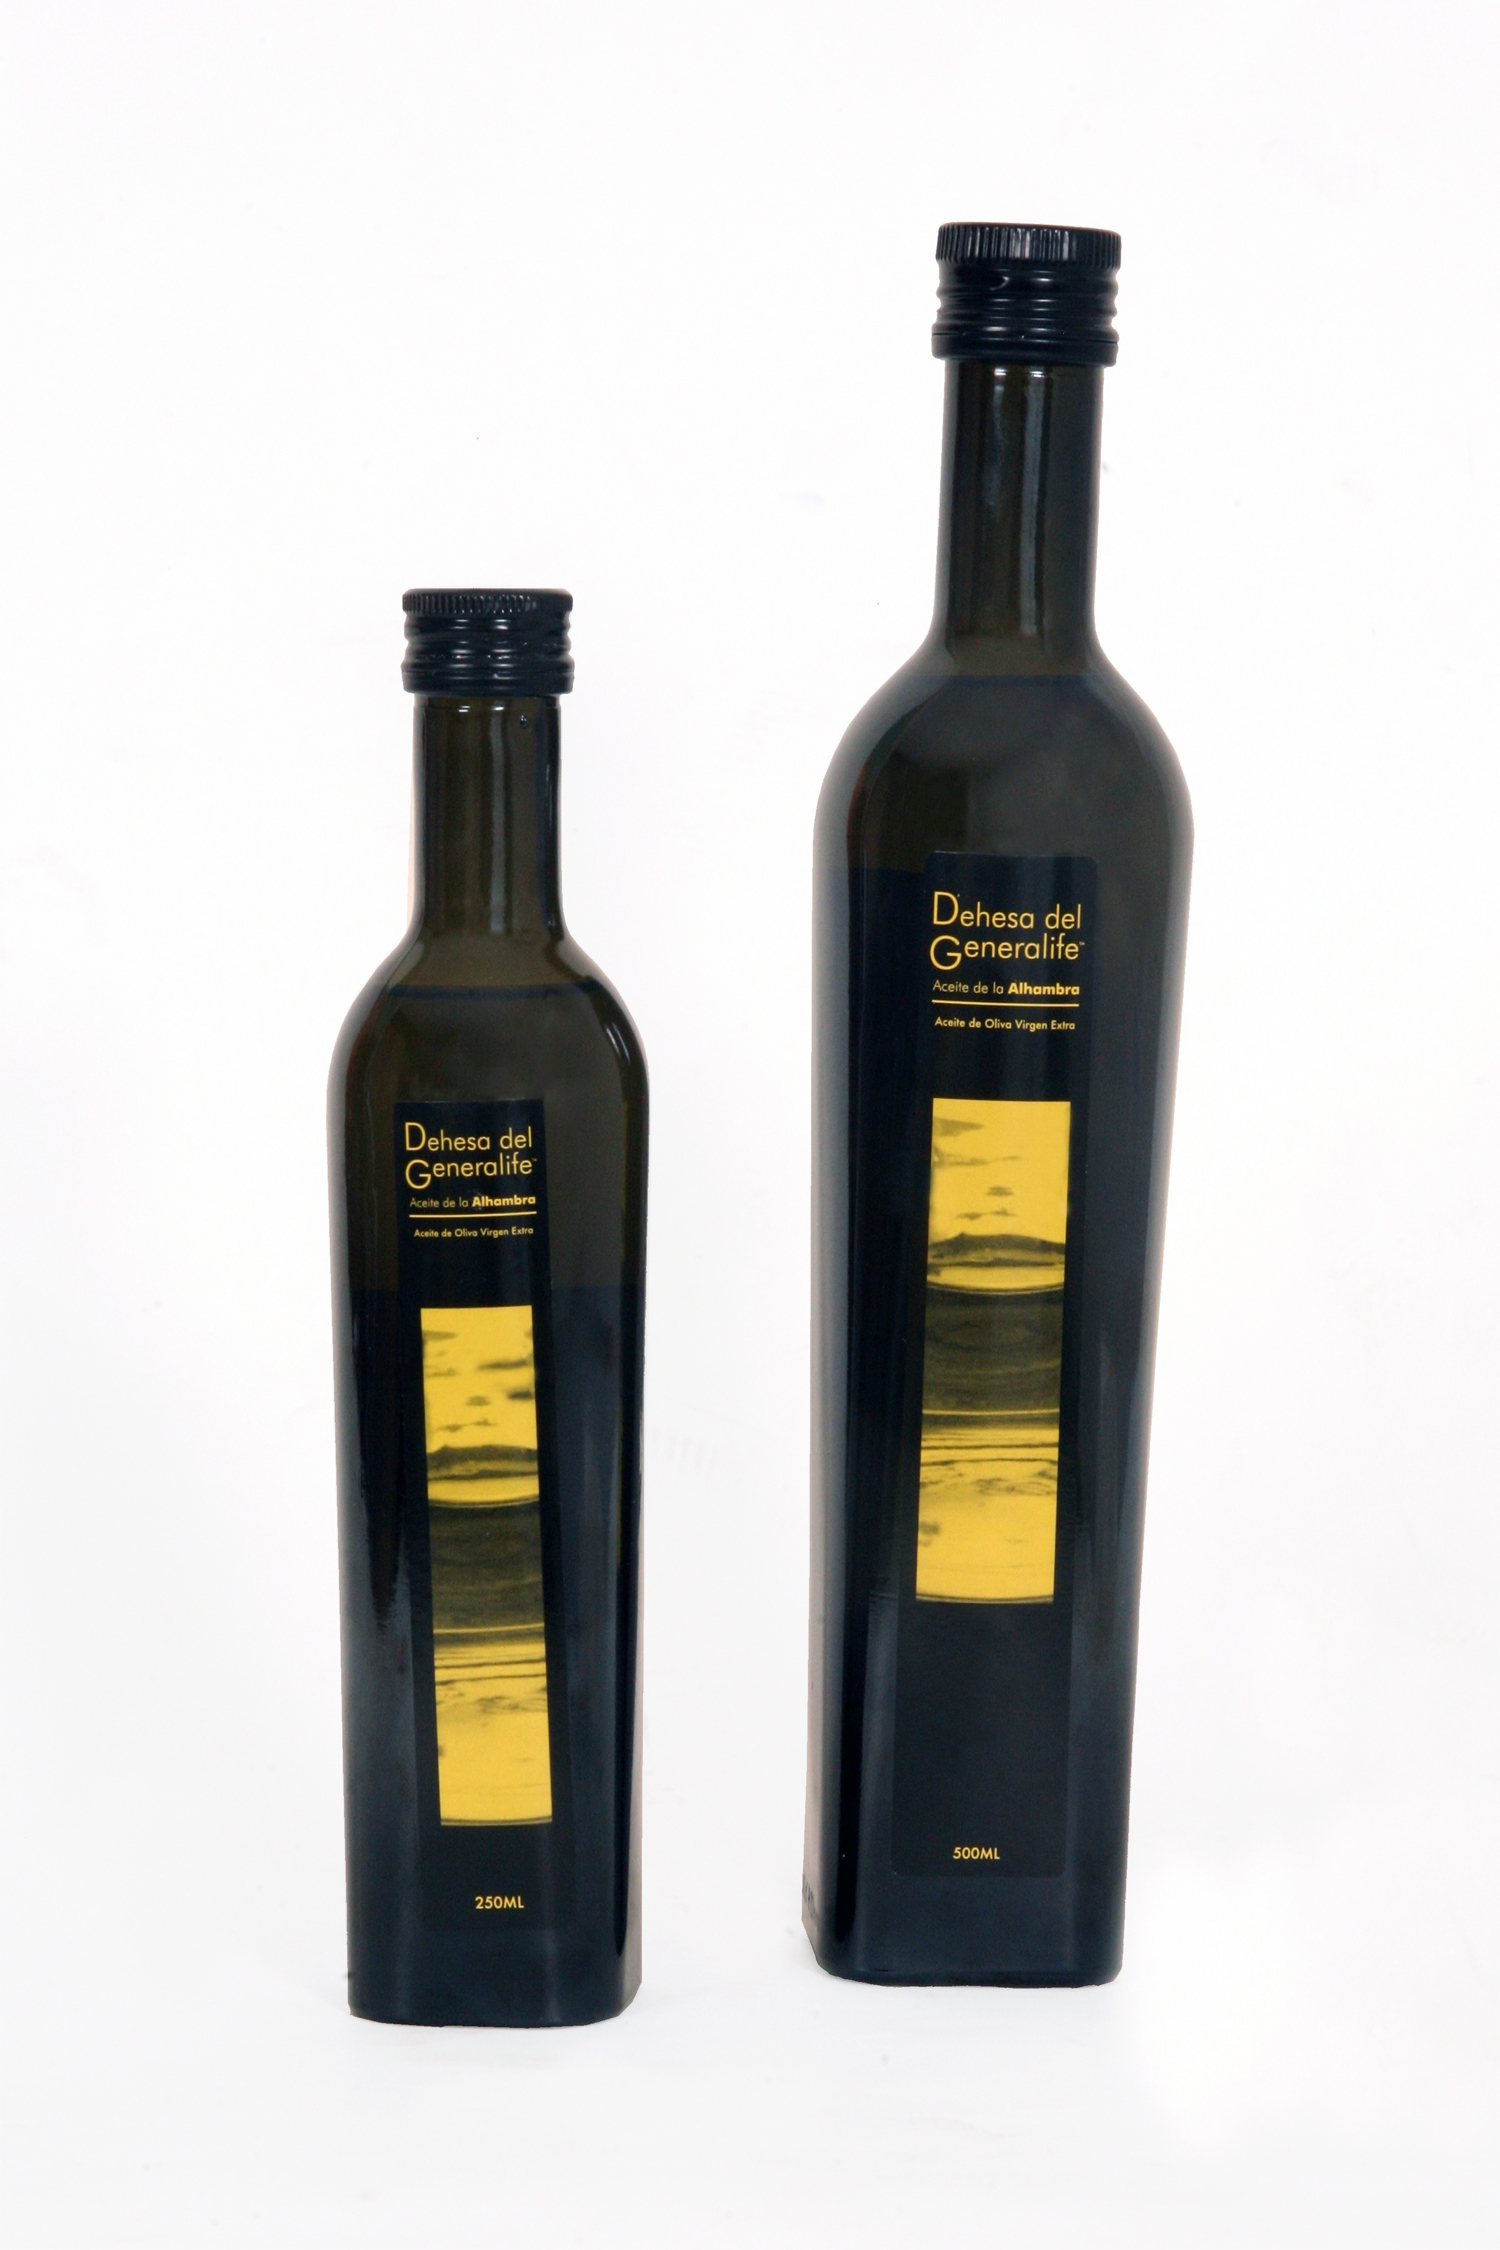 The Alhambra presents this year’s production of extra virgin olive oil from the ancient olive-trees in the Dehesa del Generalife